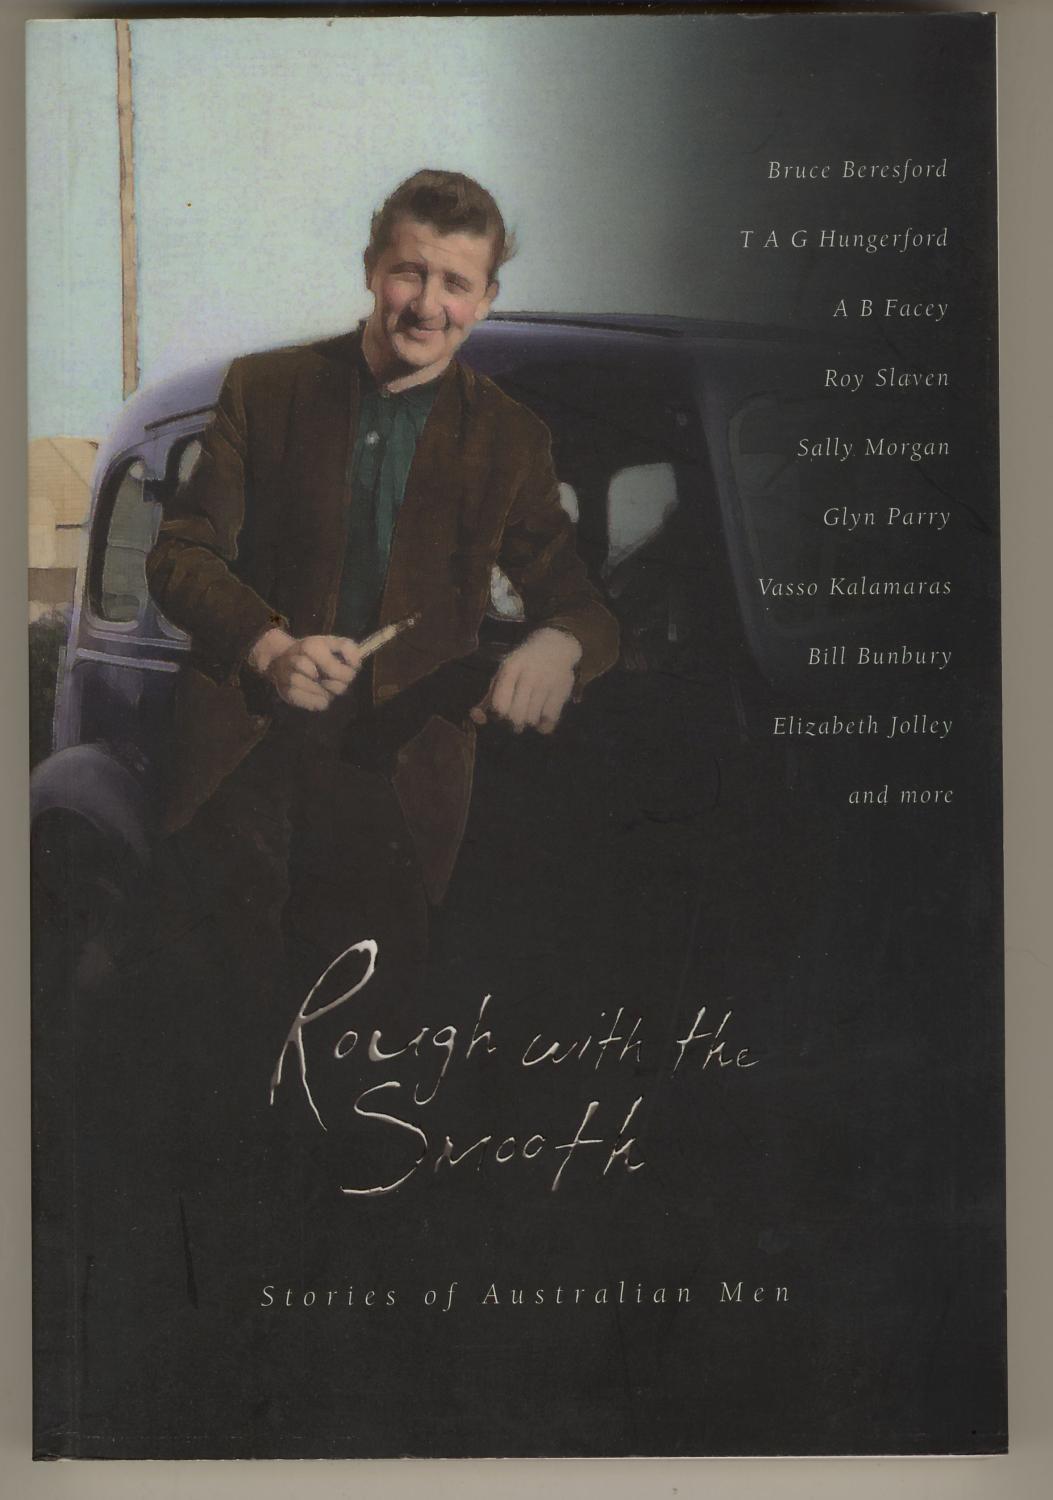 Rough with the Smooth: Stories of Australian Men - Coffey, B. R., ed.